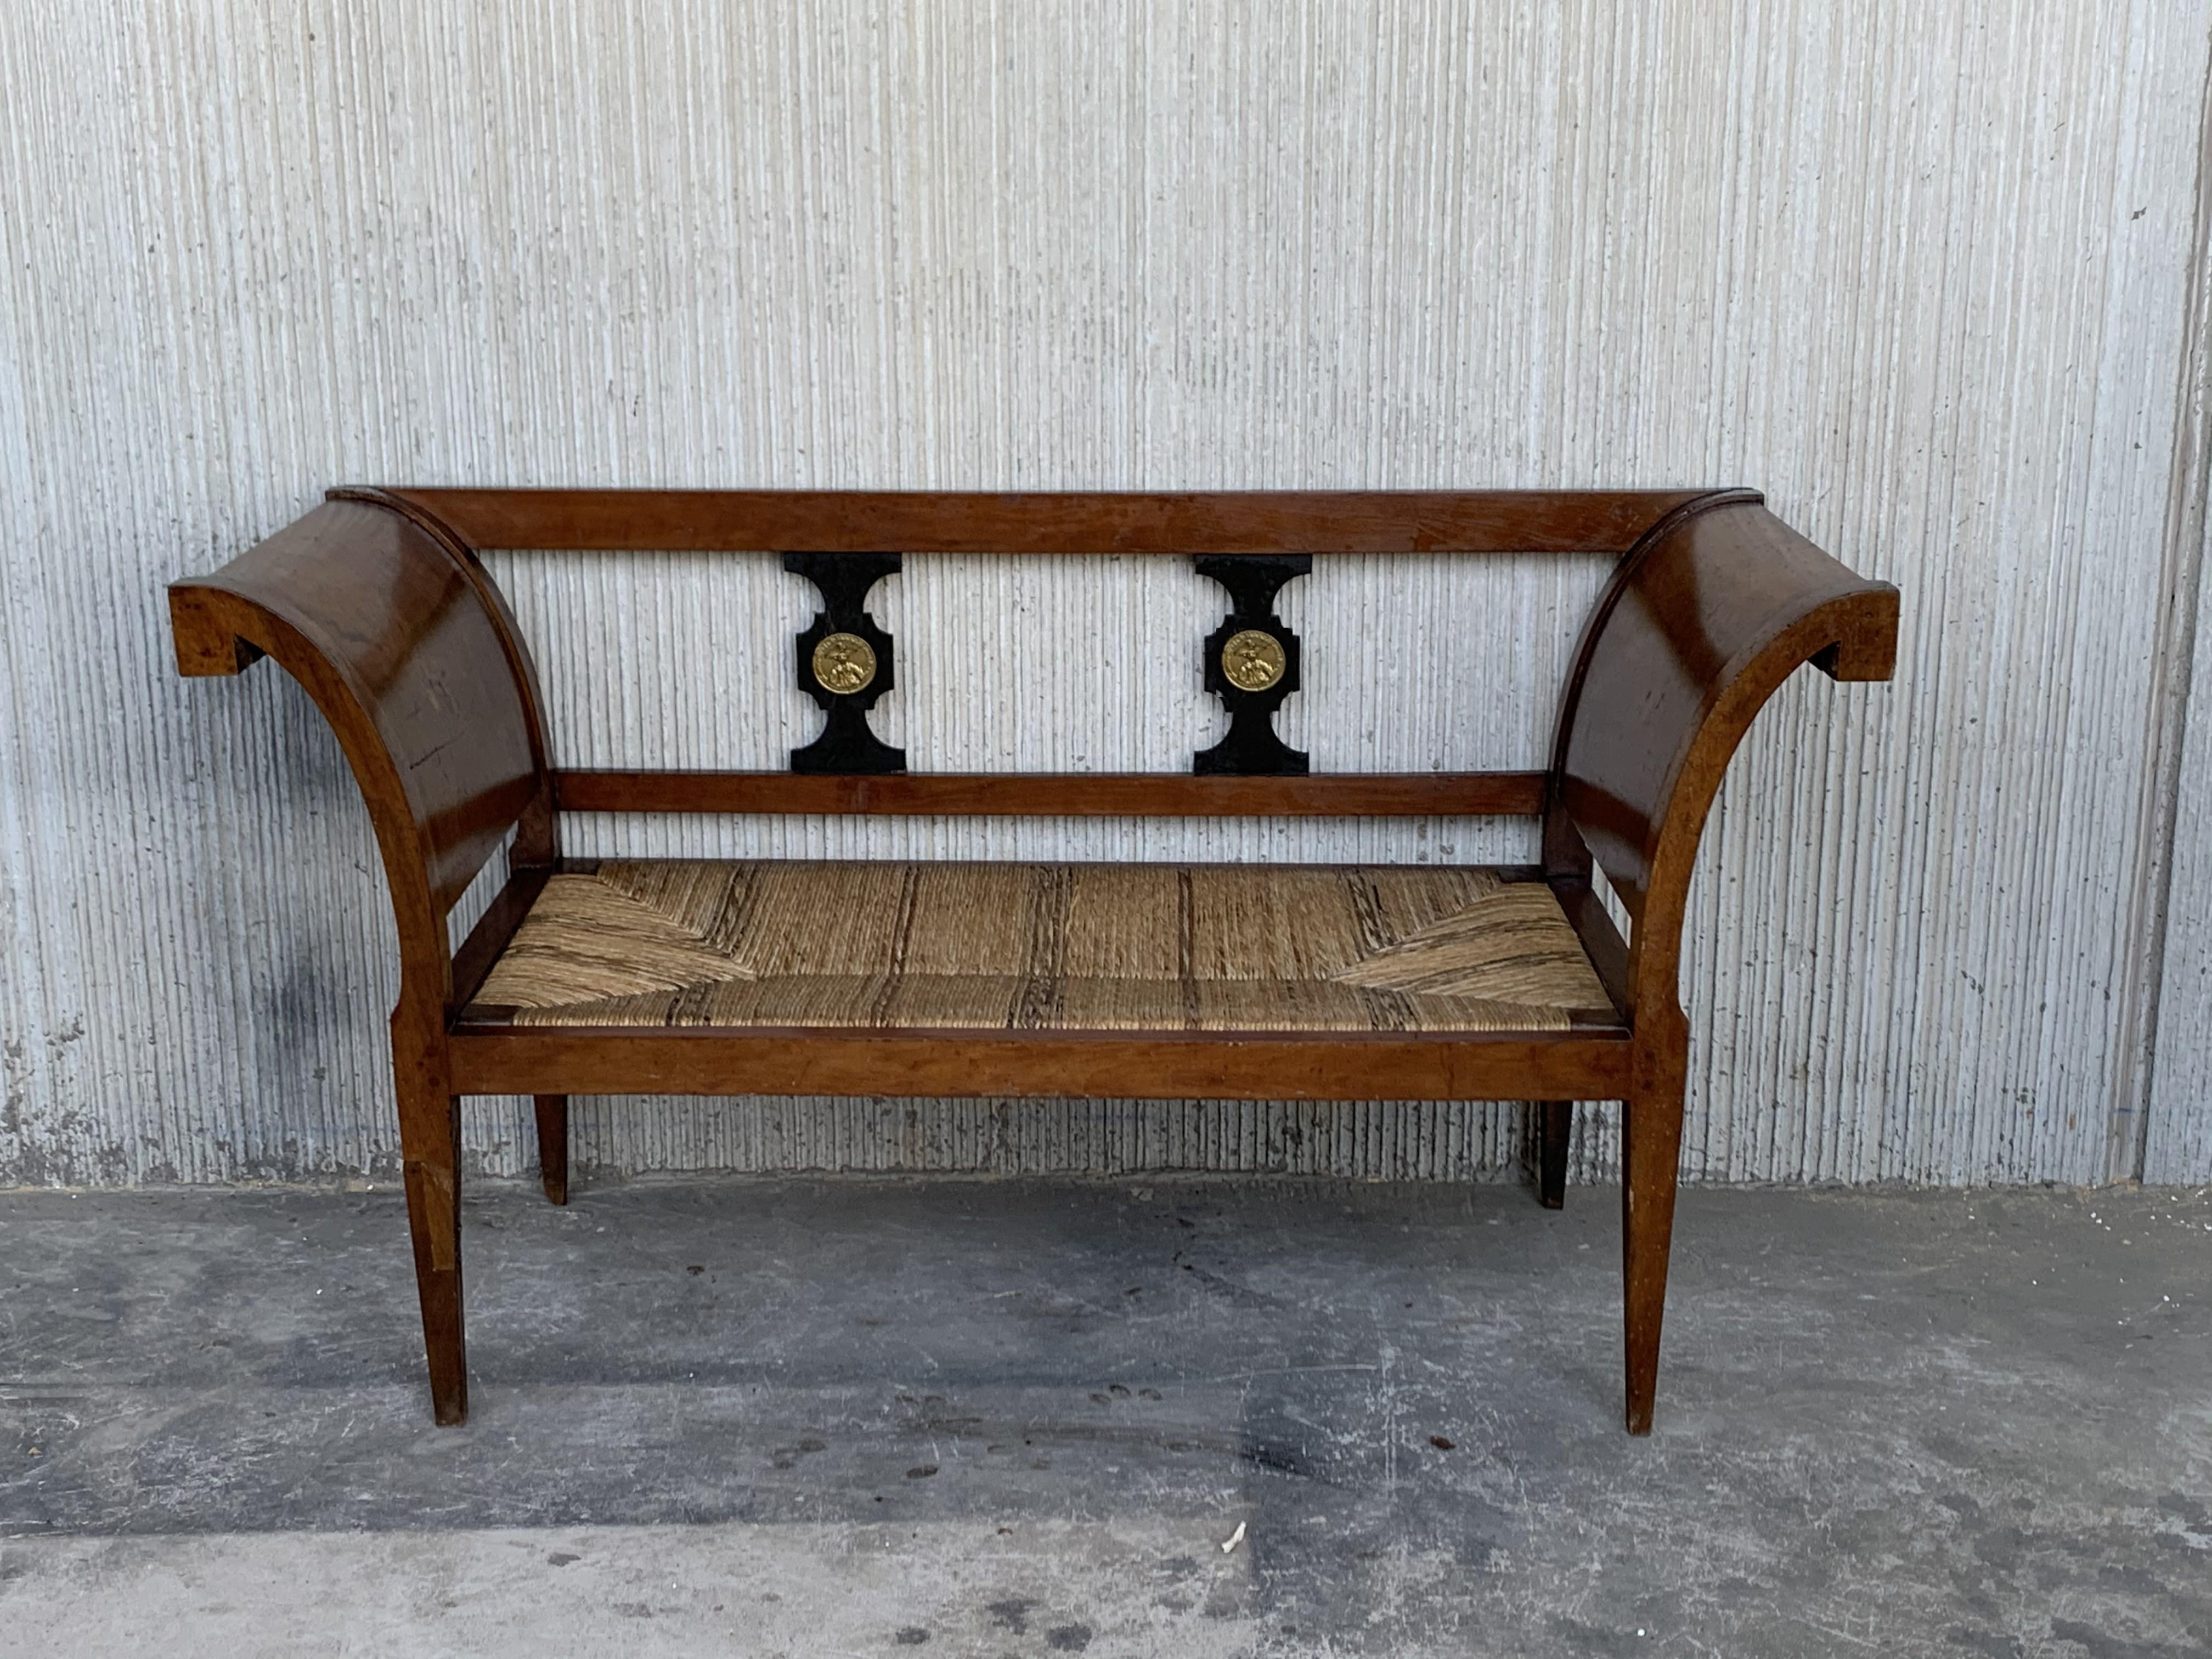 Beatiful empire sofa, settee or bench in the Spanish style with cane back and back with ebonized details.
Shown in original condition, please note price includes refinishing.



 